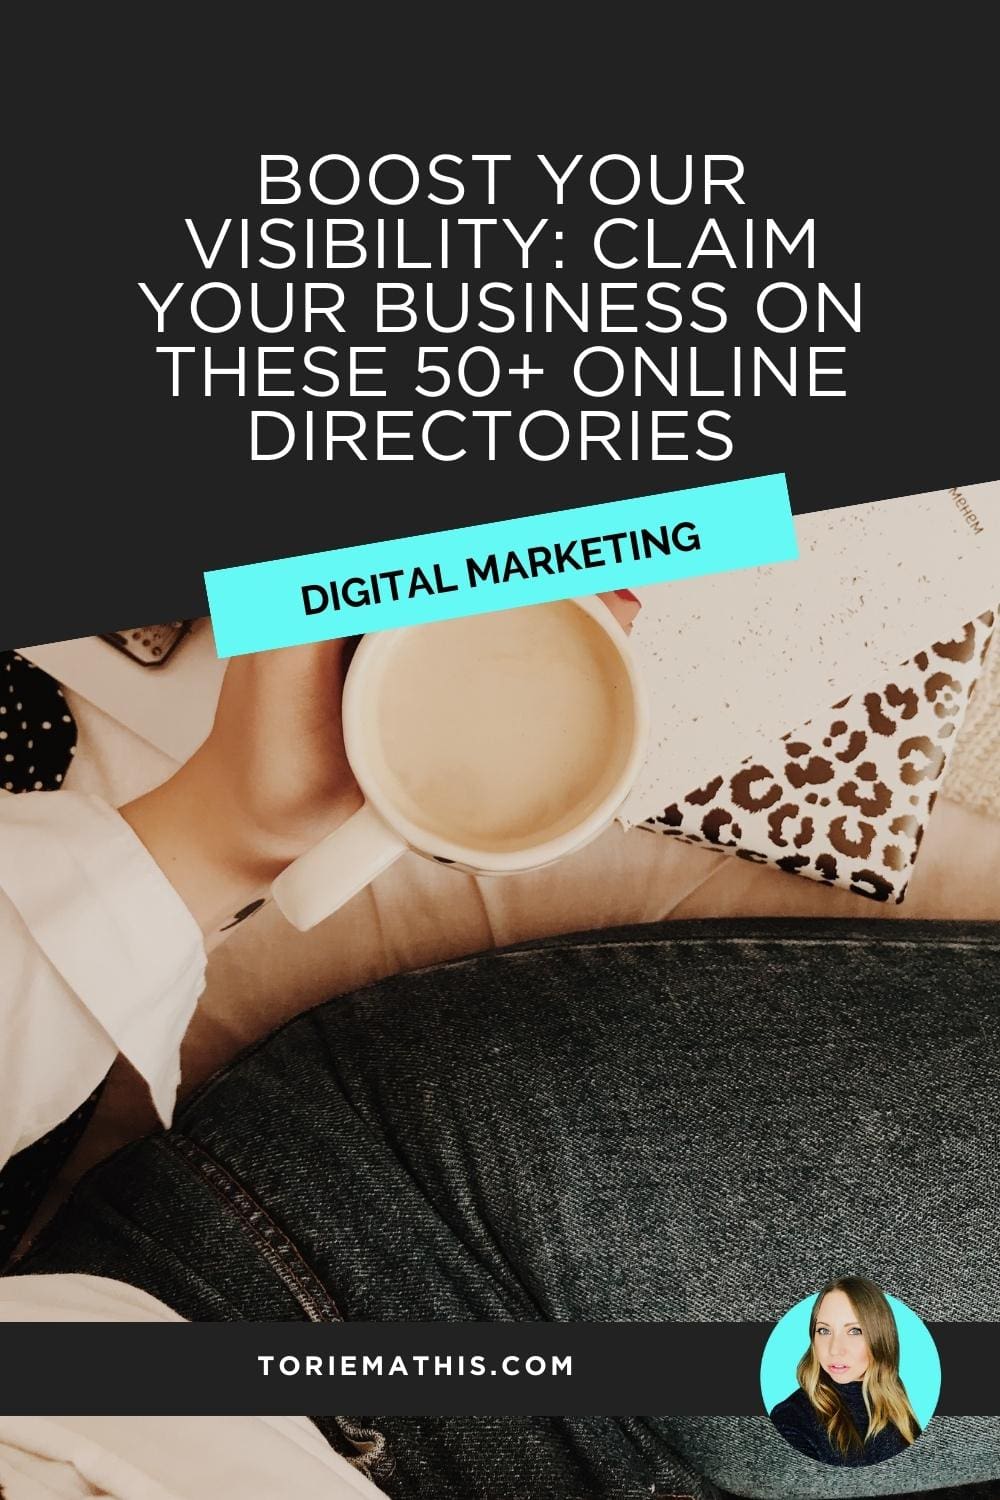 Boost Your Visibility Claim Your Business on These 50+ Online Directories and Social Media Platforms